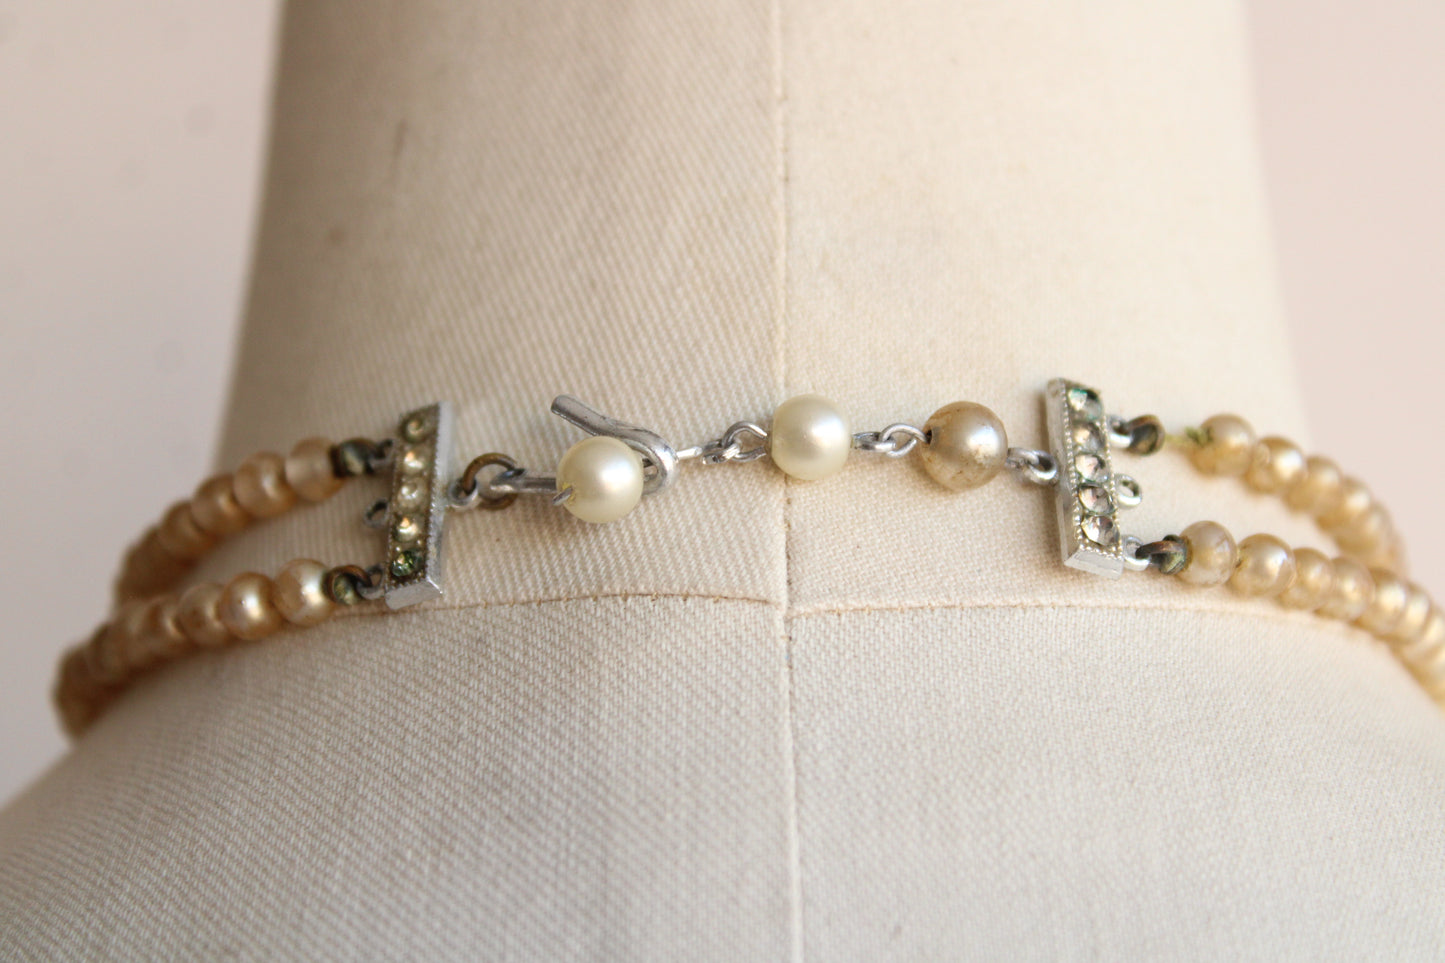 Vintage 1960s Necklace, Double Strand of Faux Pearls